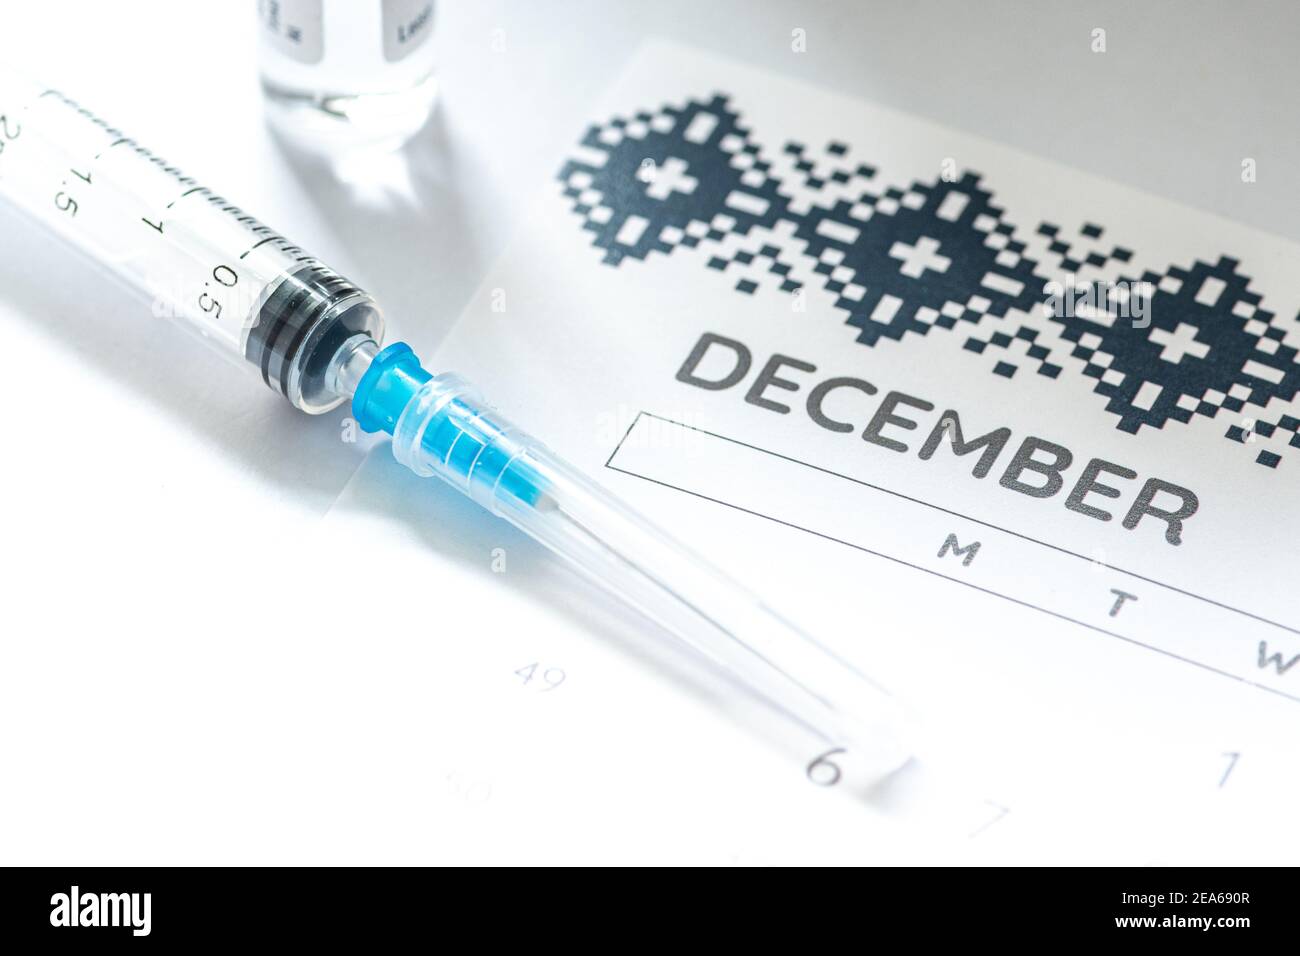 Syringe, glass vial or phial and calendar with month of December on a white table ready to be used. Covid or Coronavirus vaccine background, close up Stock Photo